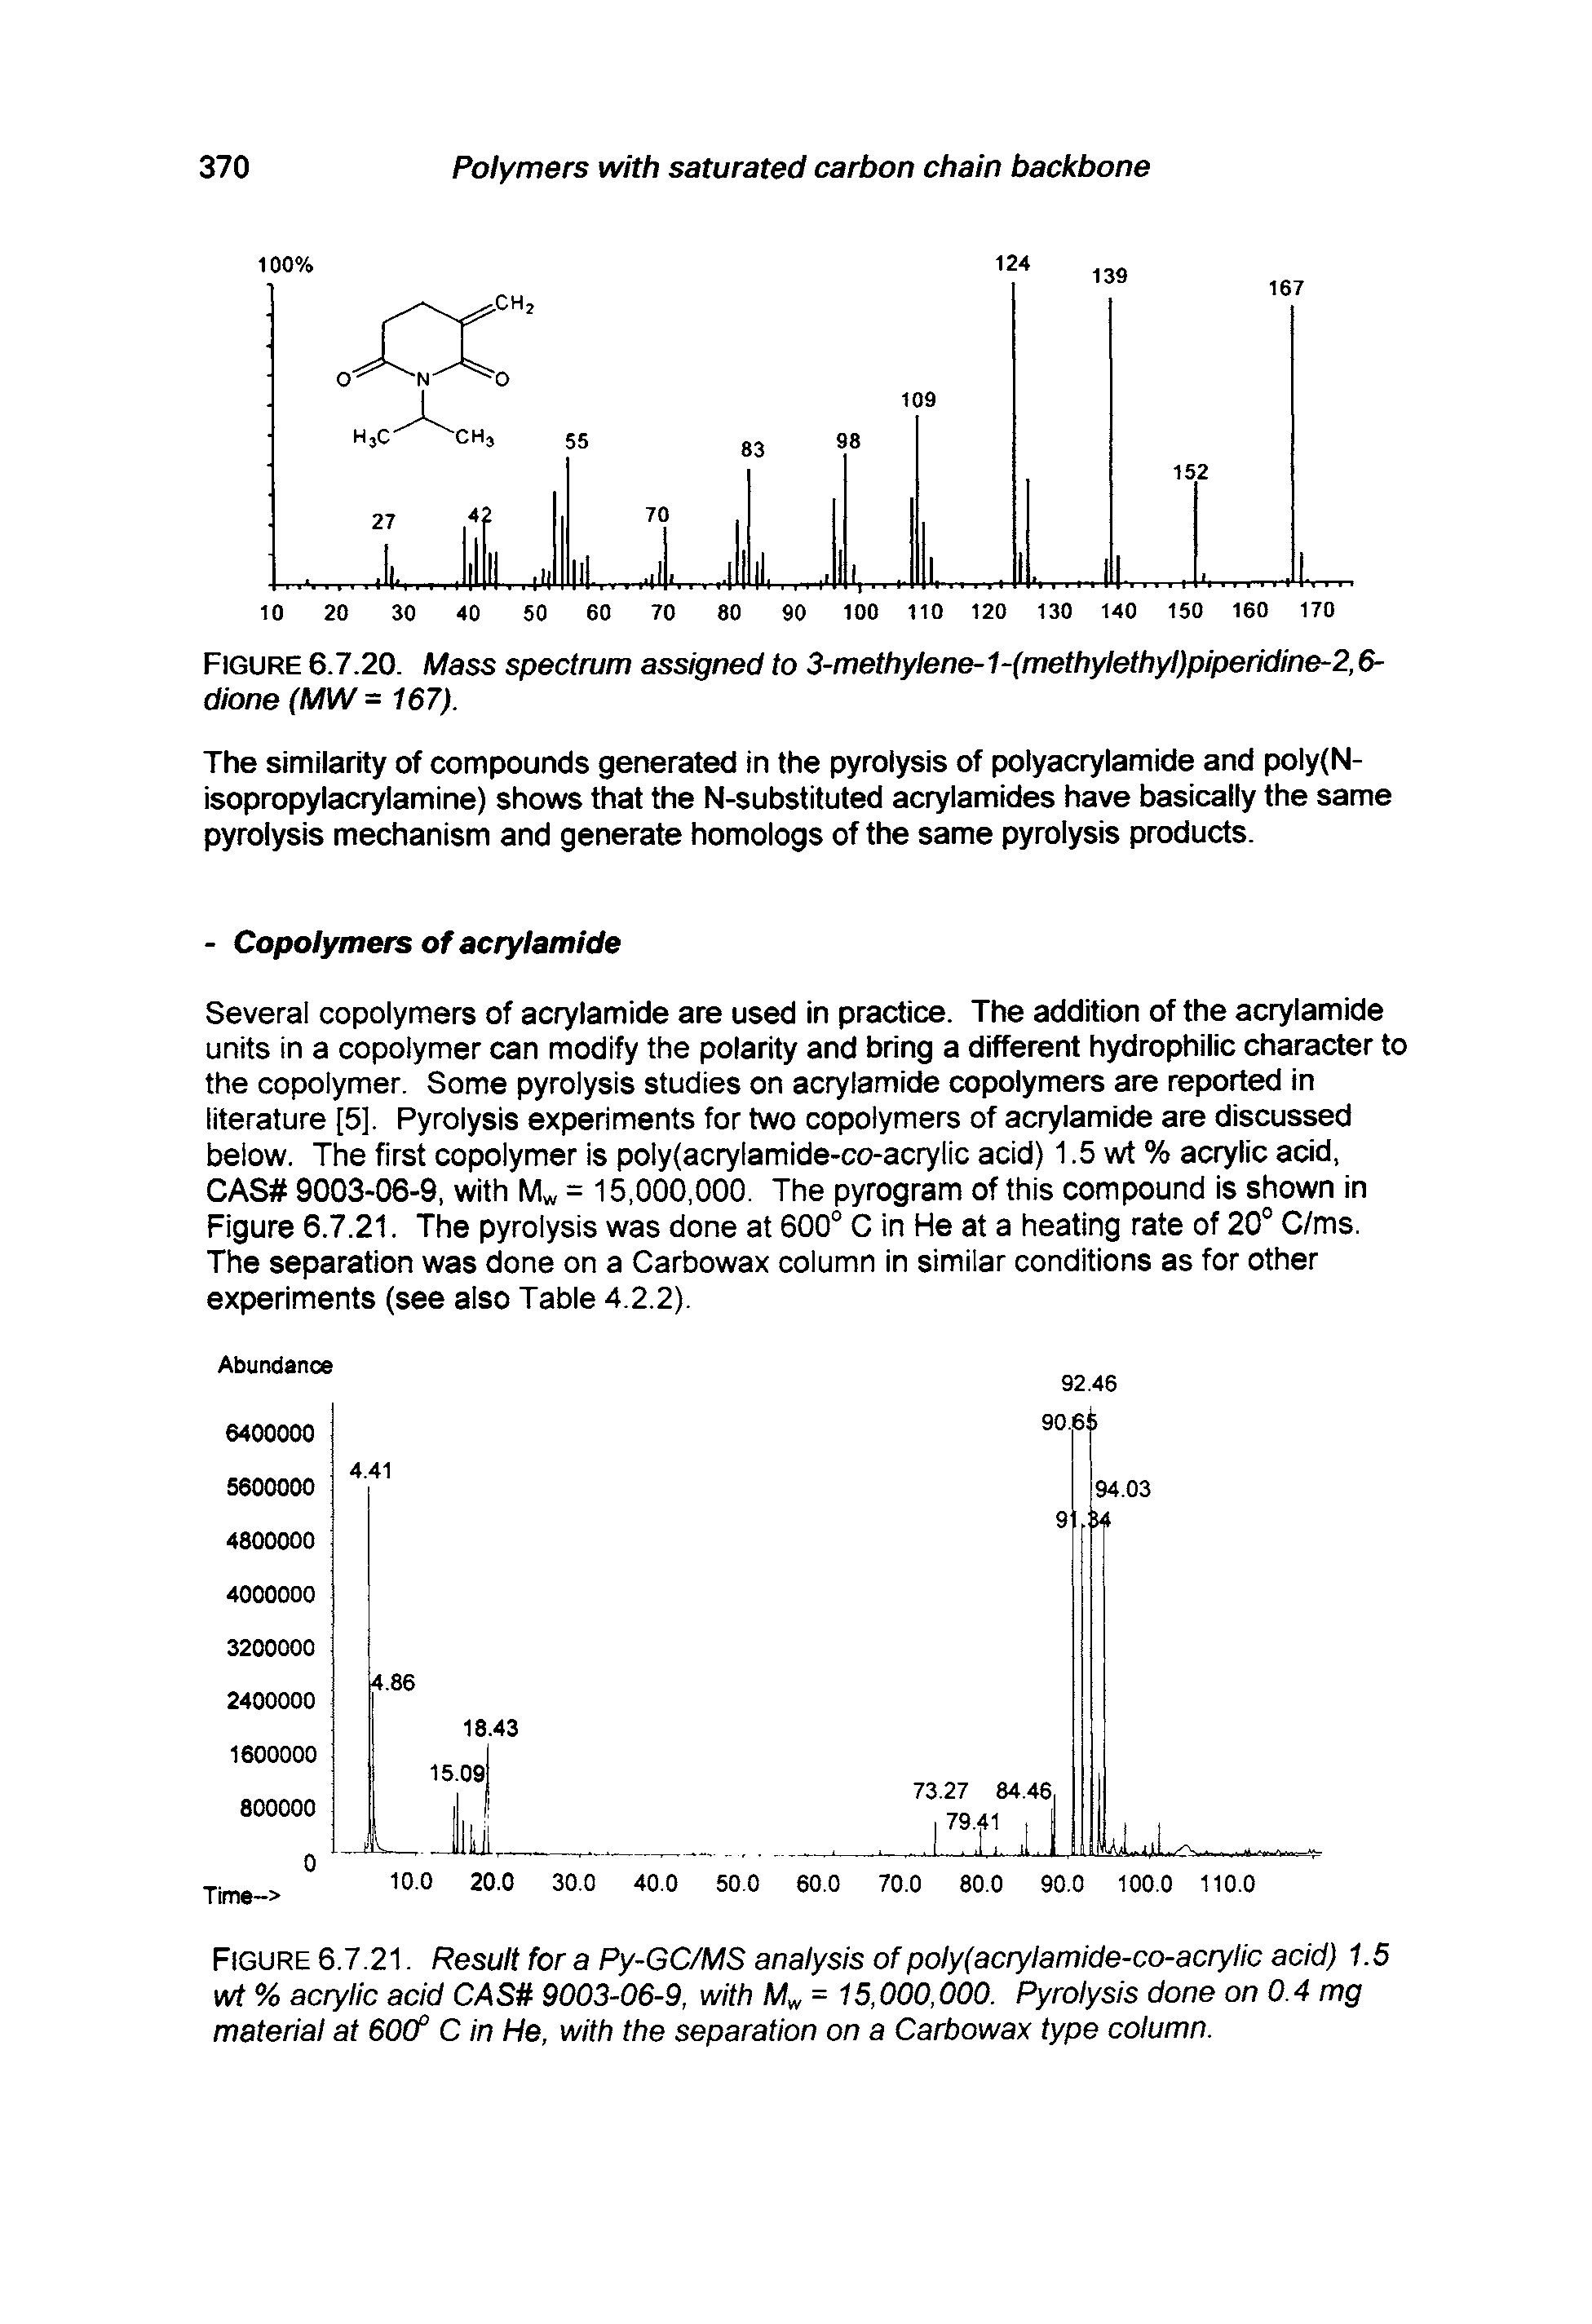 Figure 6.7.21. Result for a Py-GC/MS analysis of poly(acrylamide-co-acrylic acid) 1.5 wt % acrylic acid CAS 9003-06-9, with M = 15,000,000. Pyrolysis done on 0.4 mg material at 60(f C in He, with the separation on a Carbowax type column.